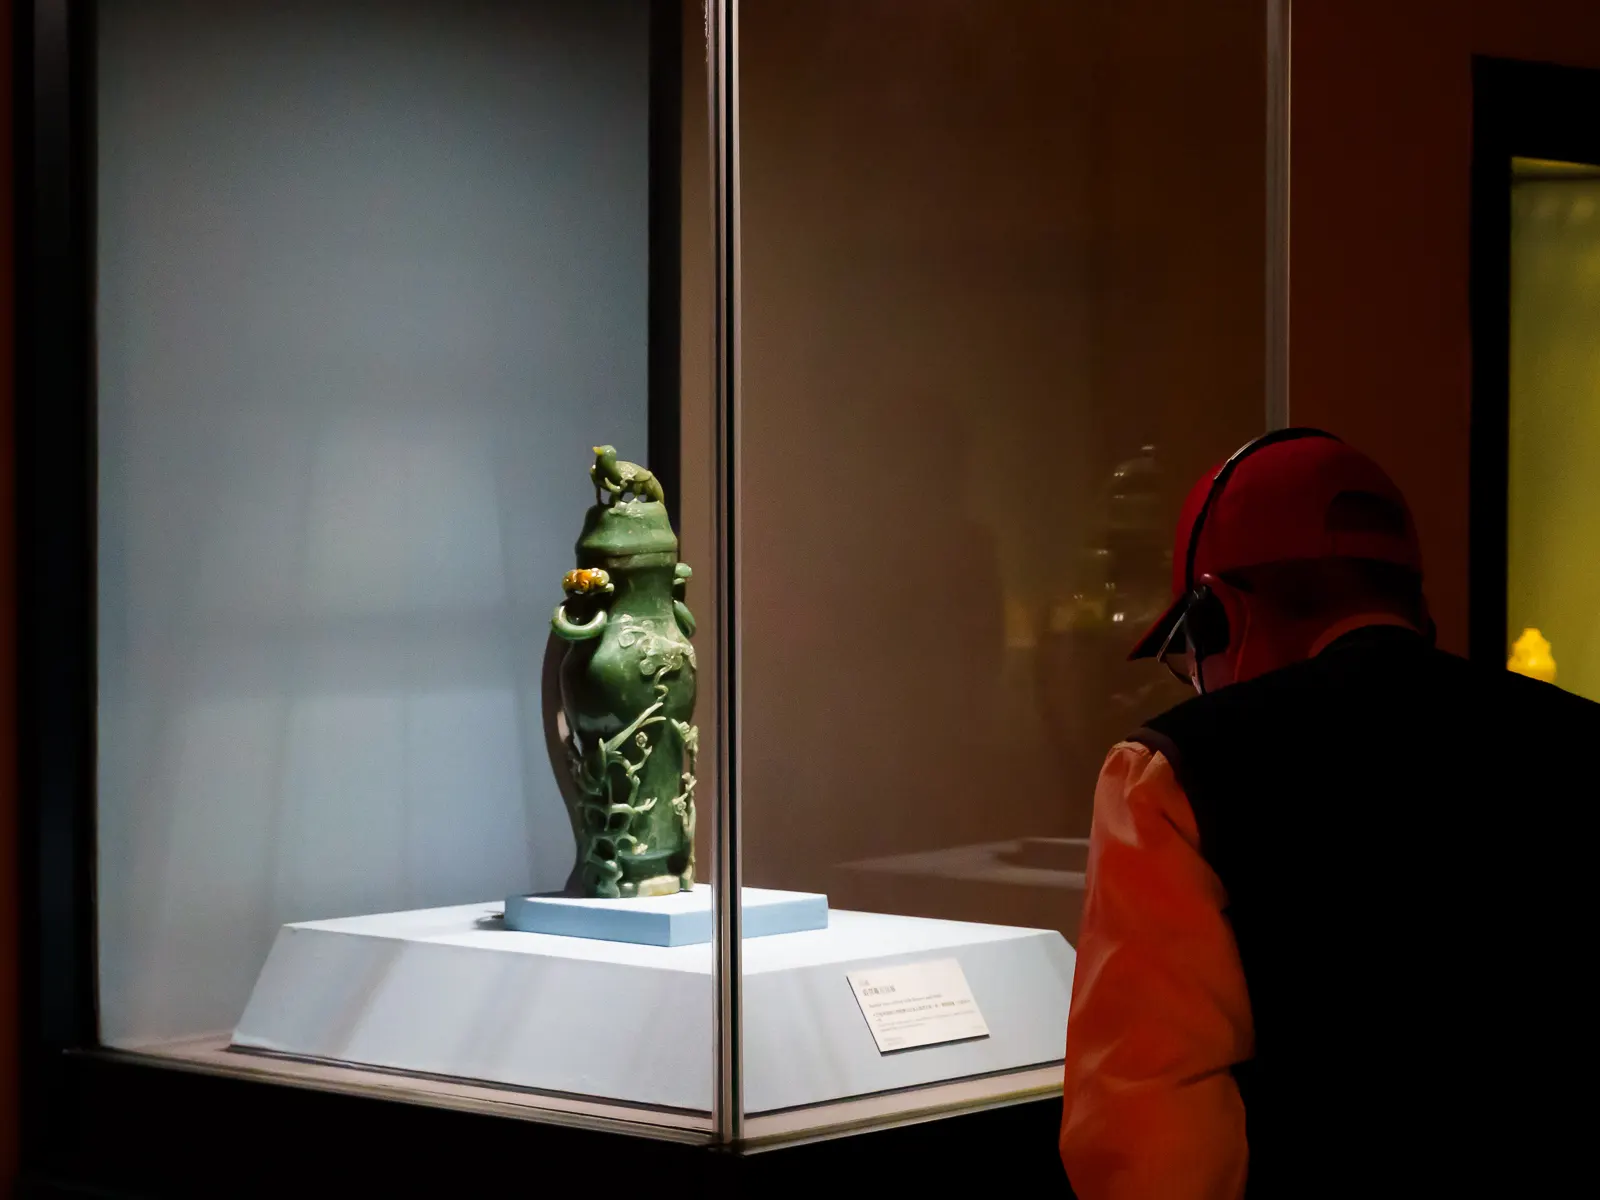 A visitor studies an green ornate vase in a glass display.